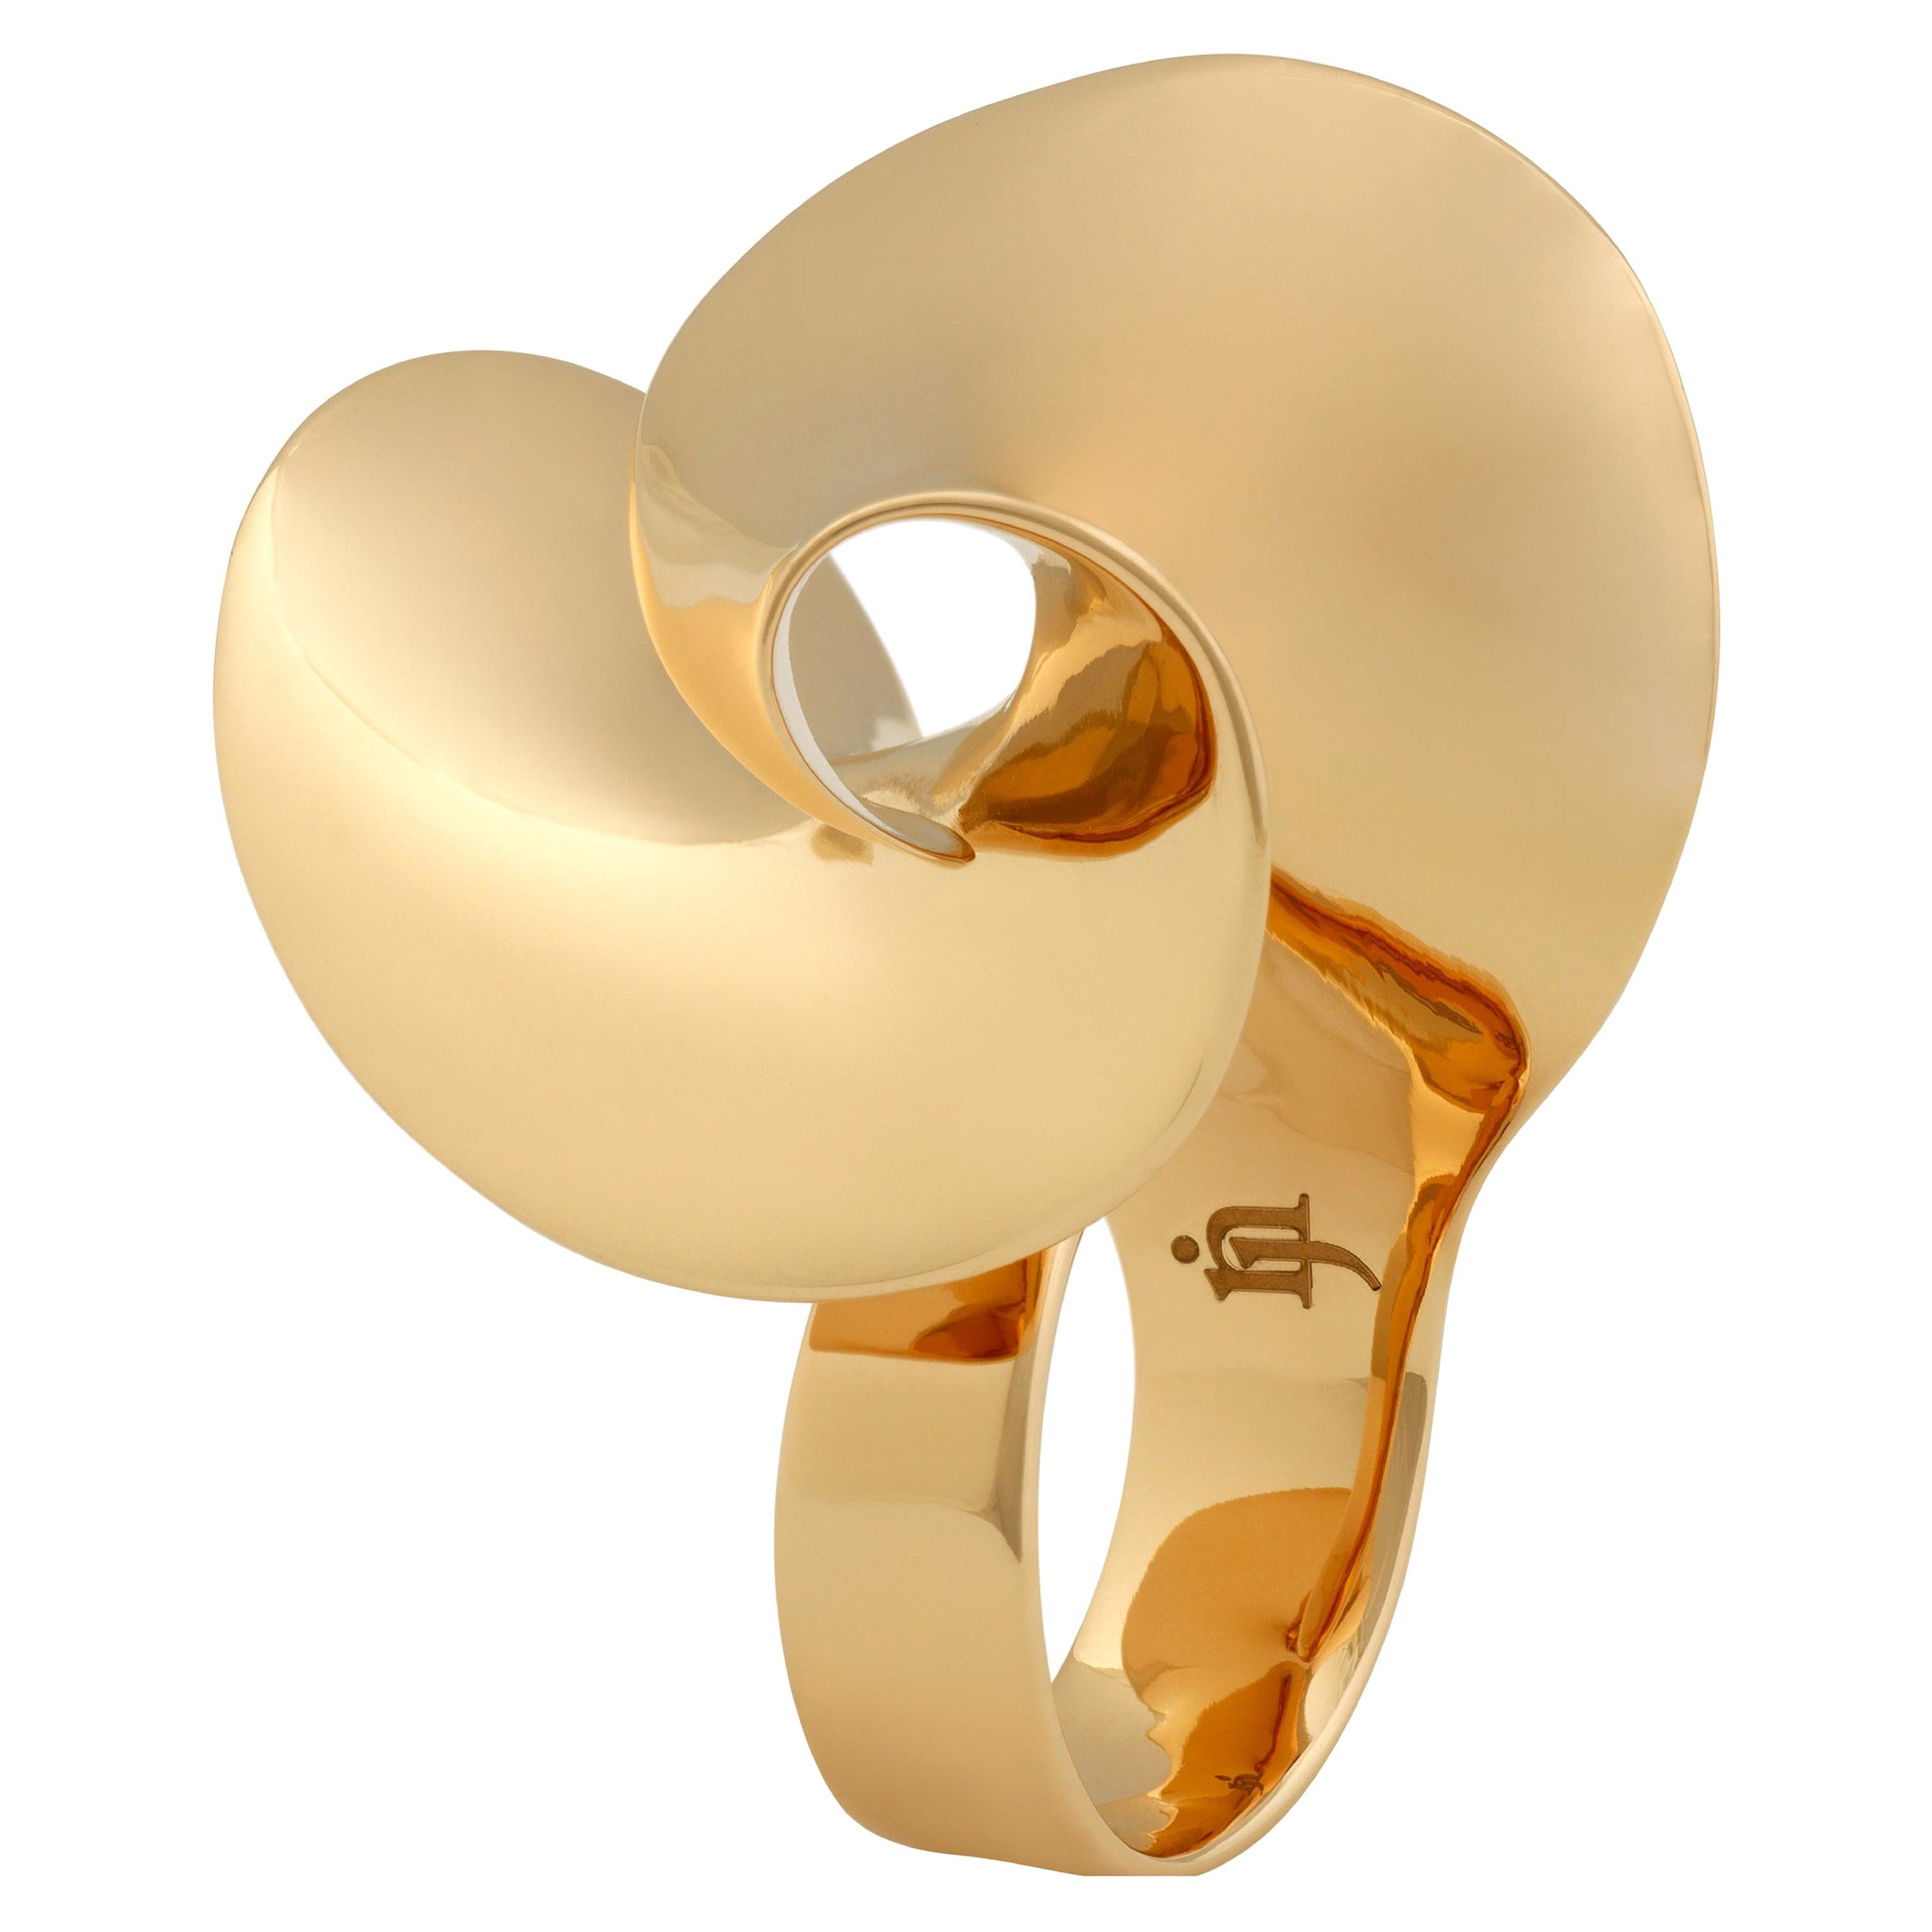 Nathalie Jean Contemporary Gold Limited Edition Sculpture Cocktail Ring